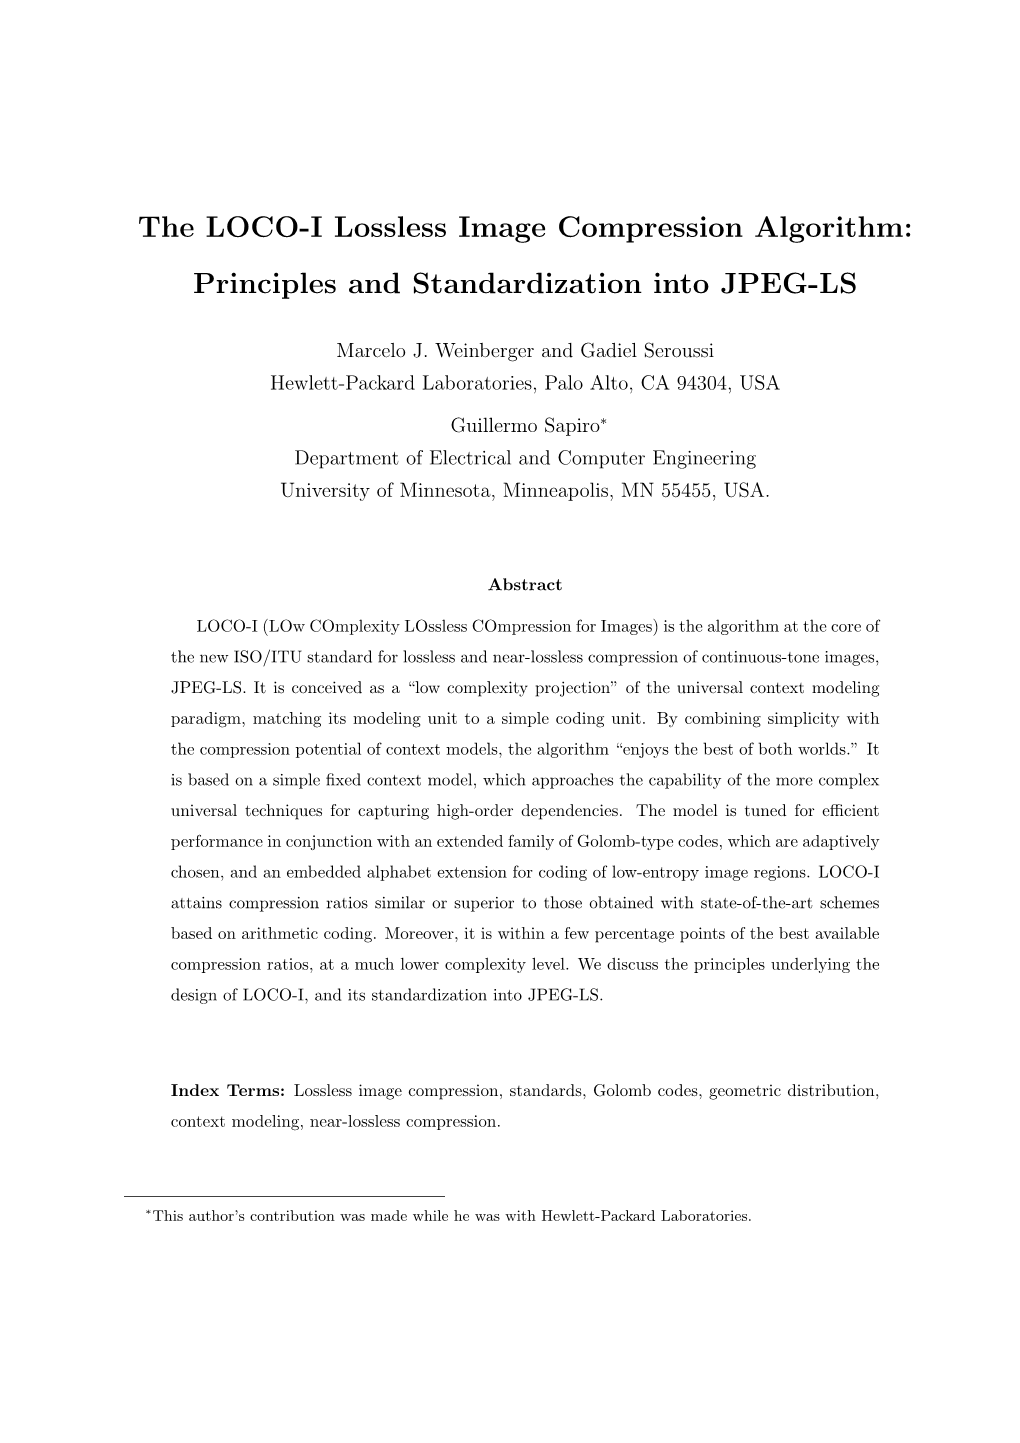 The LOCO-I Lossless Image Compression Algorithm: Principles and Standardization Into JPEG-LS